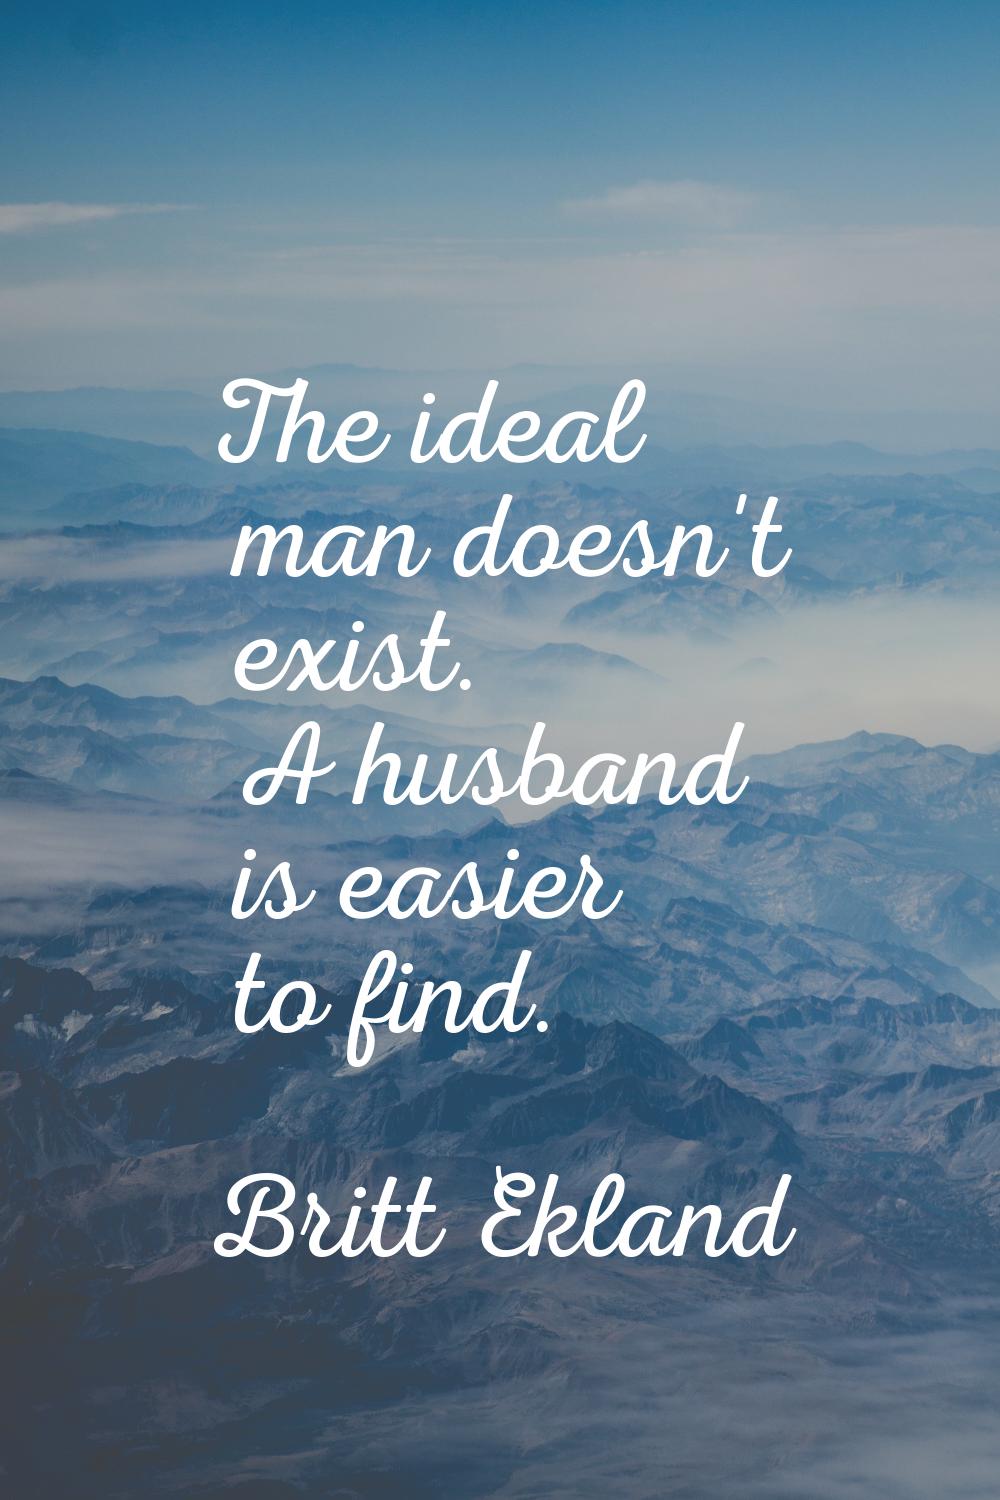 The ideal man doesn't exist. A husband is easier to find.